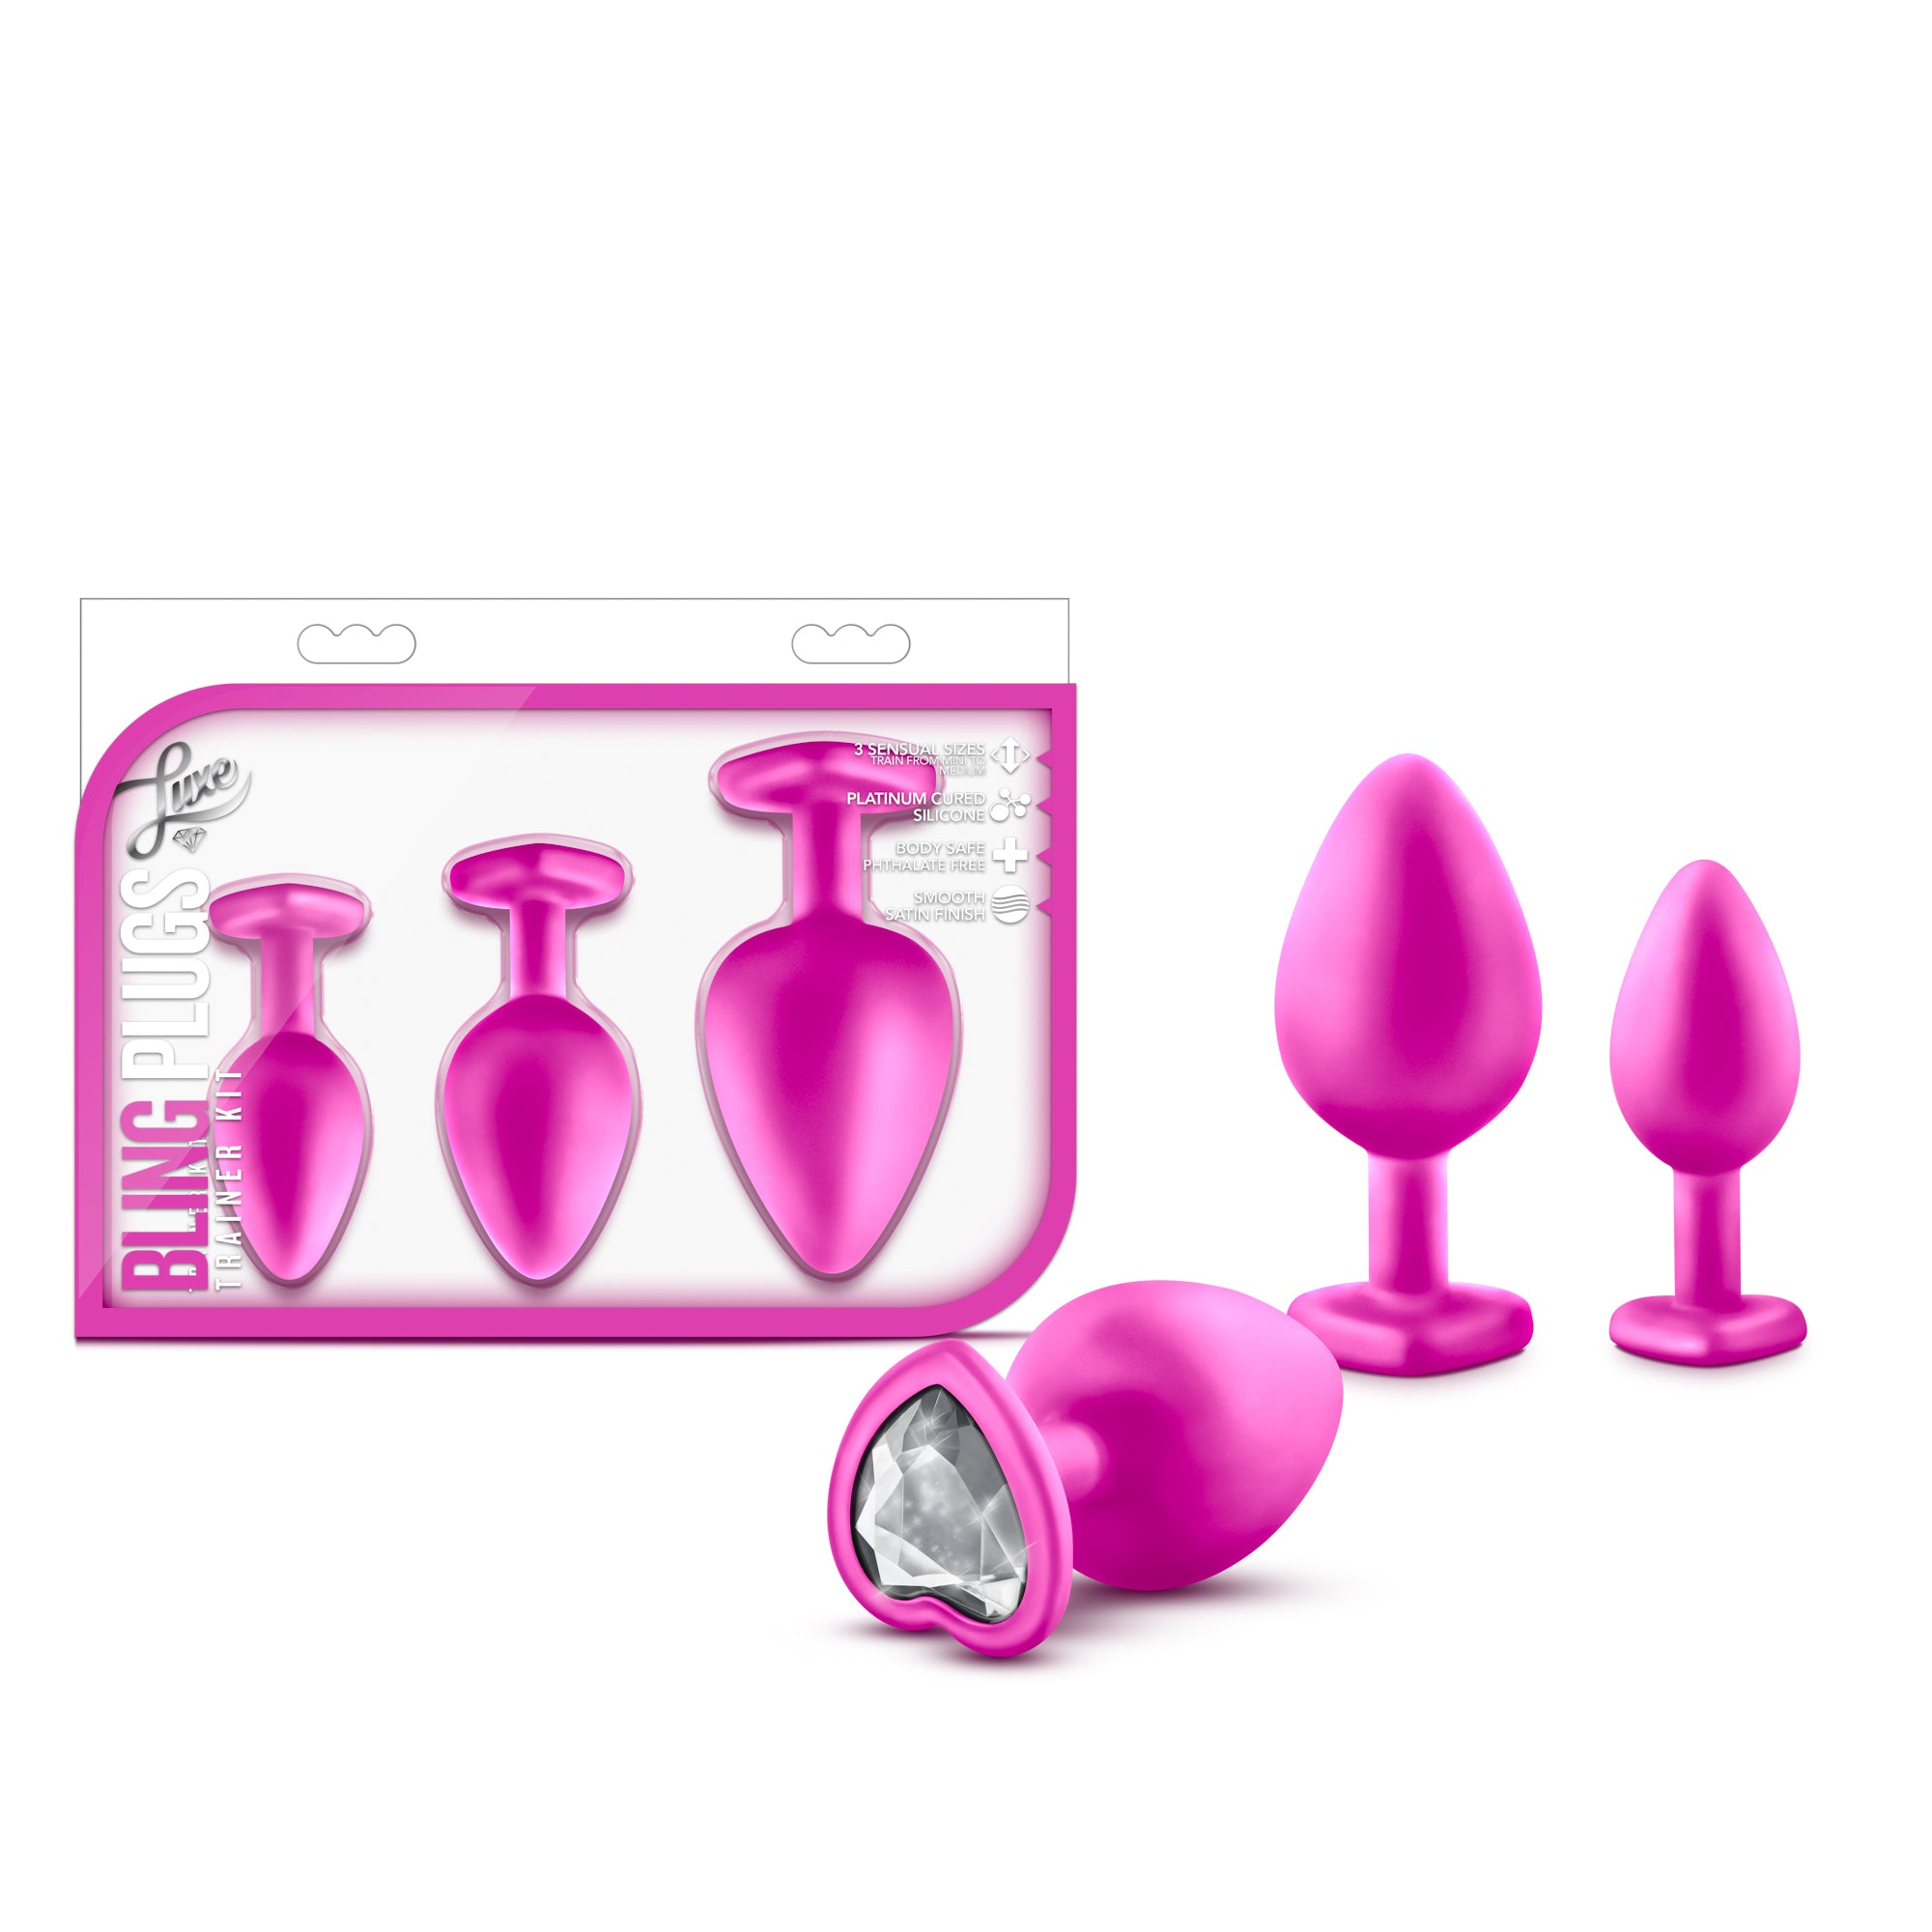 Luxe - Bling Plugs Training Kit - Pink With White Gems Pink/White